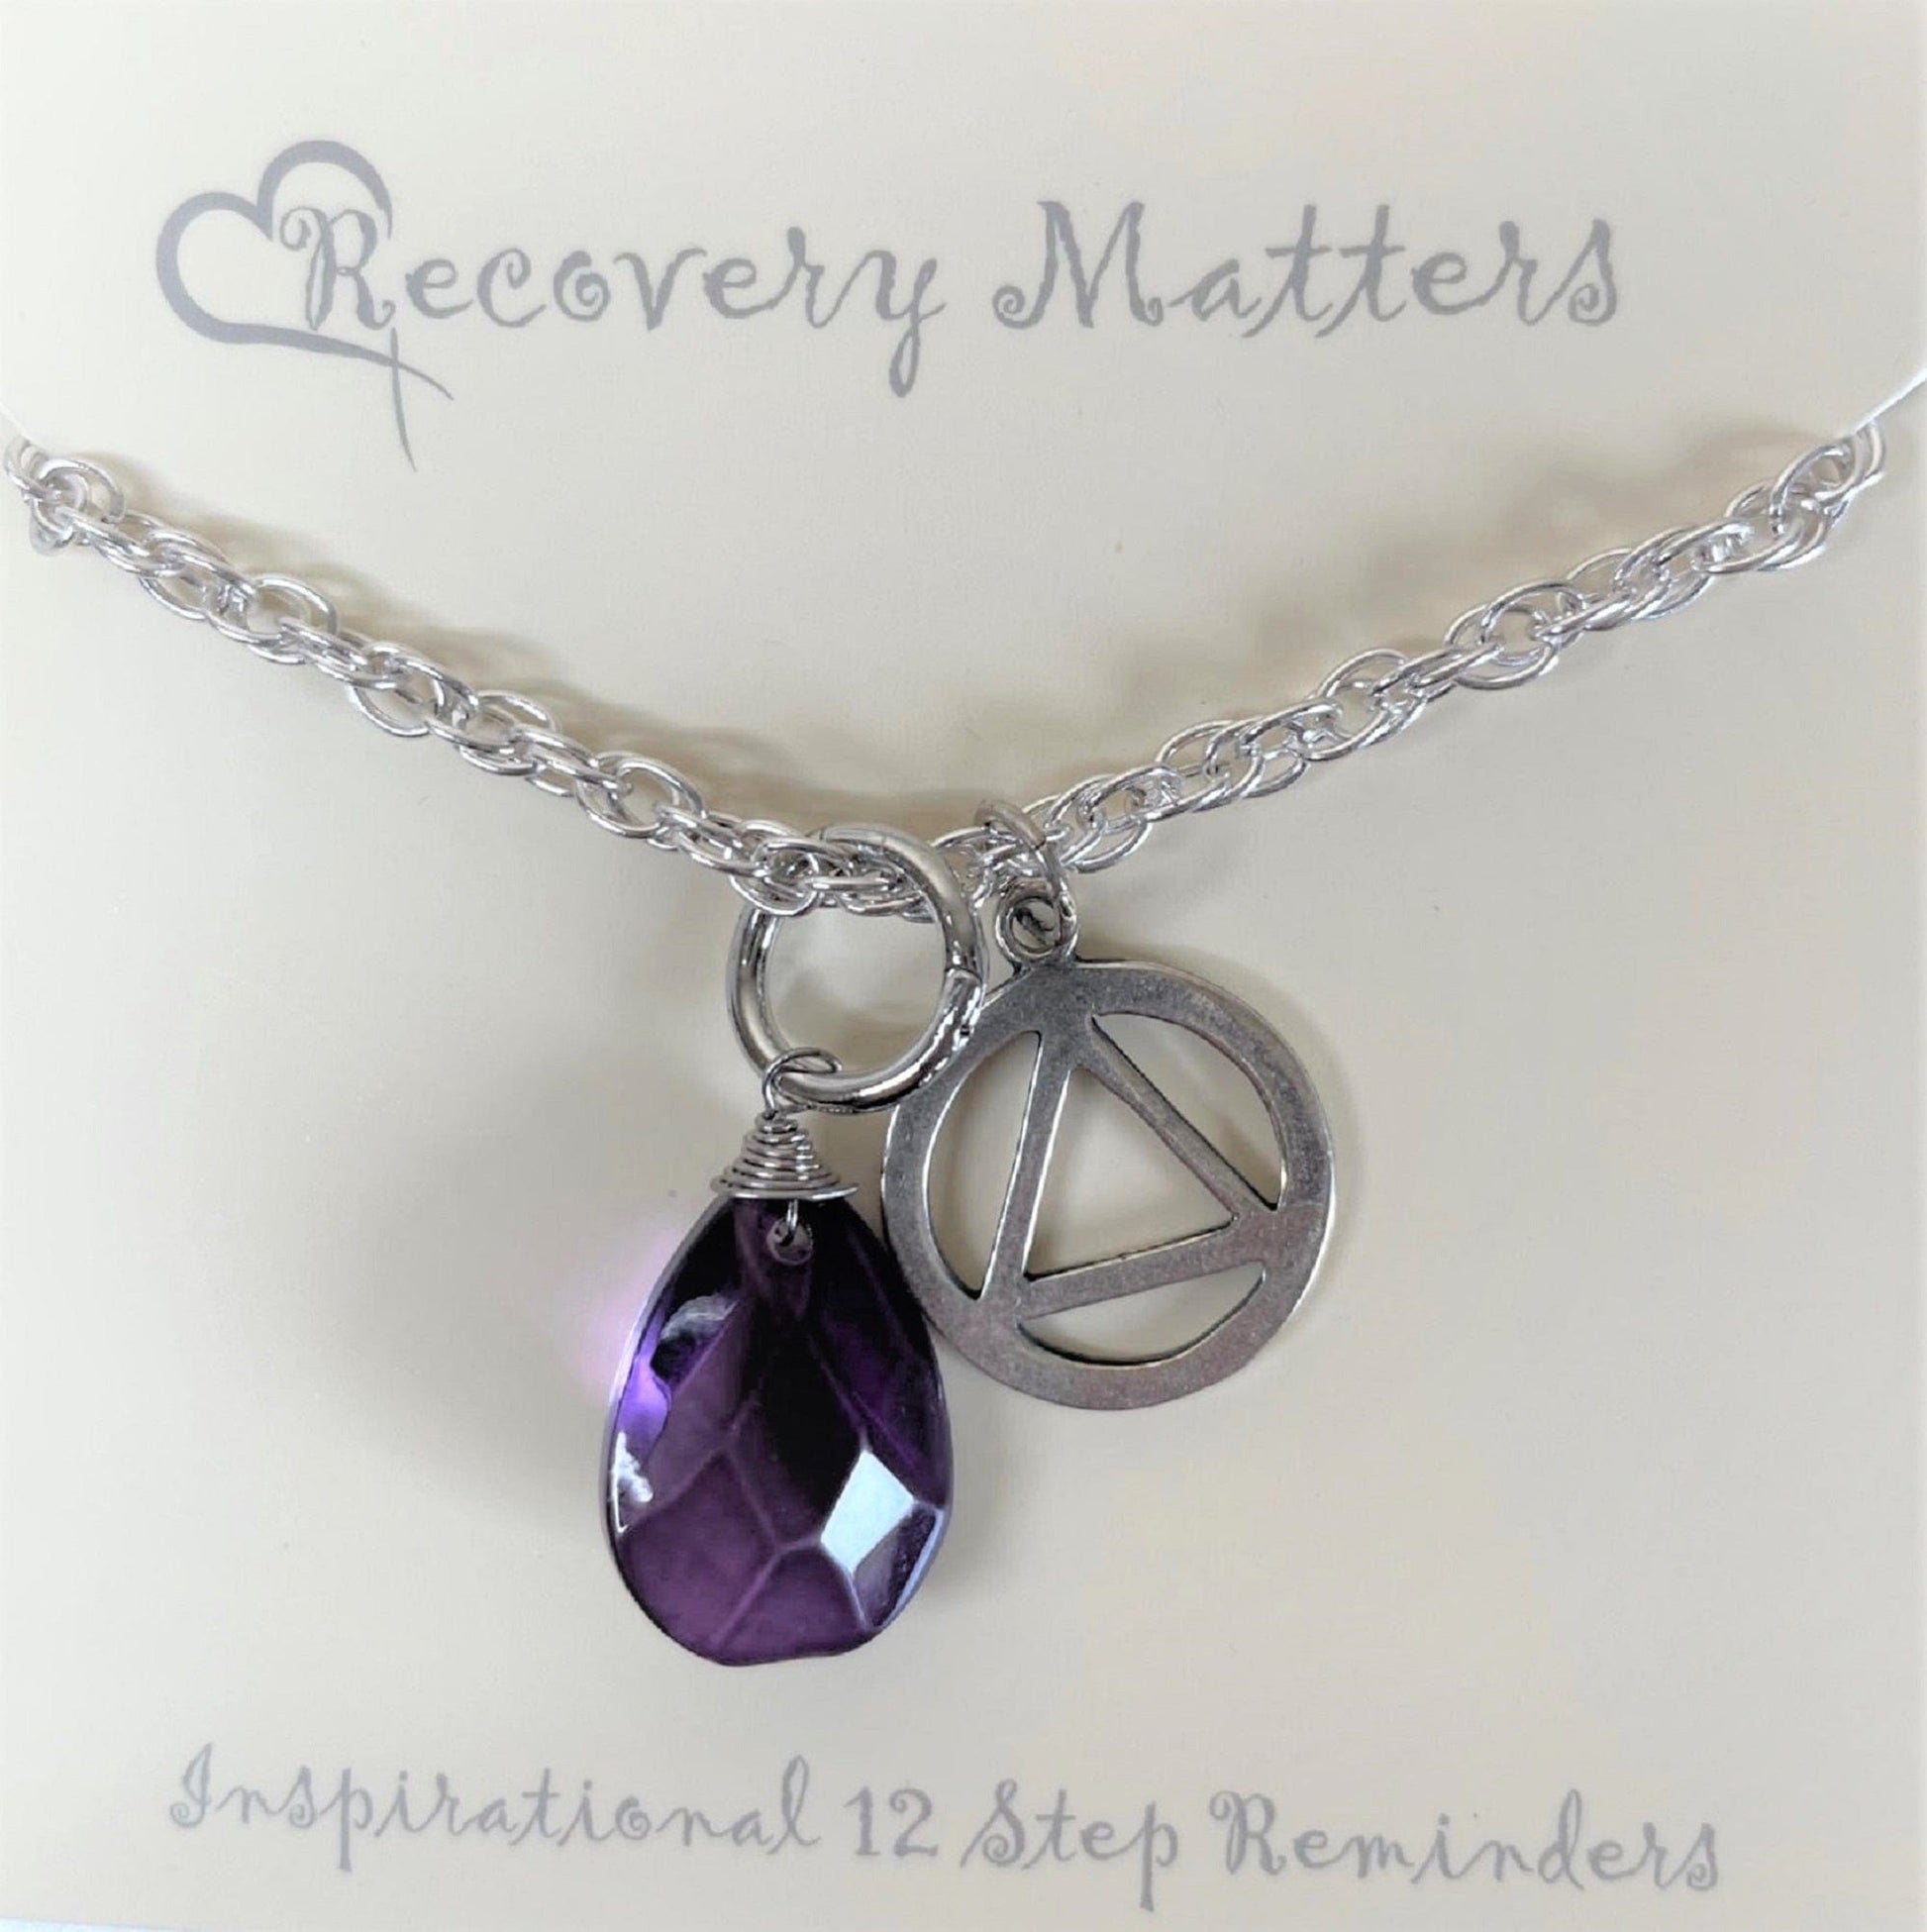 Silver Toned Necklace With Alcoholics Anonymous  Symbol By Recovery Matters